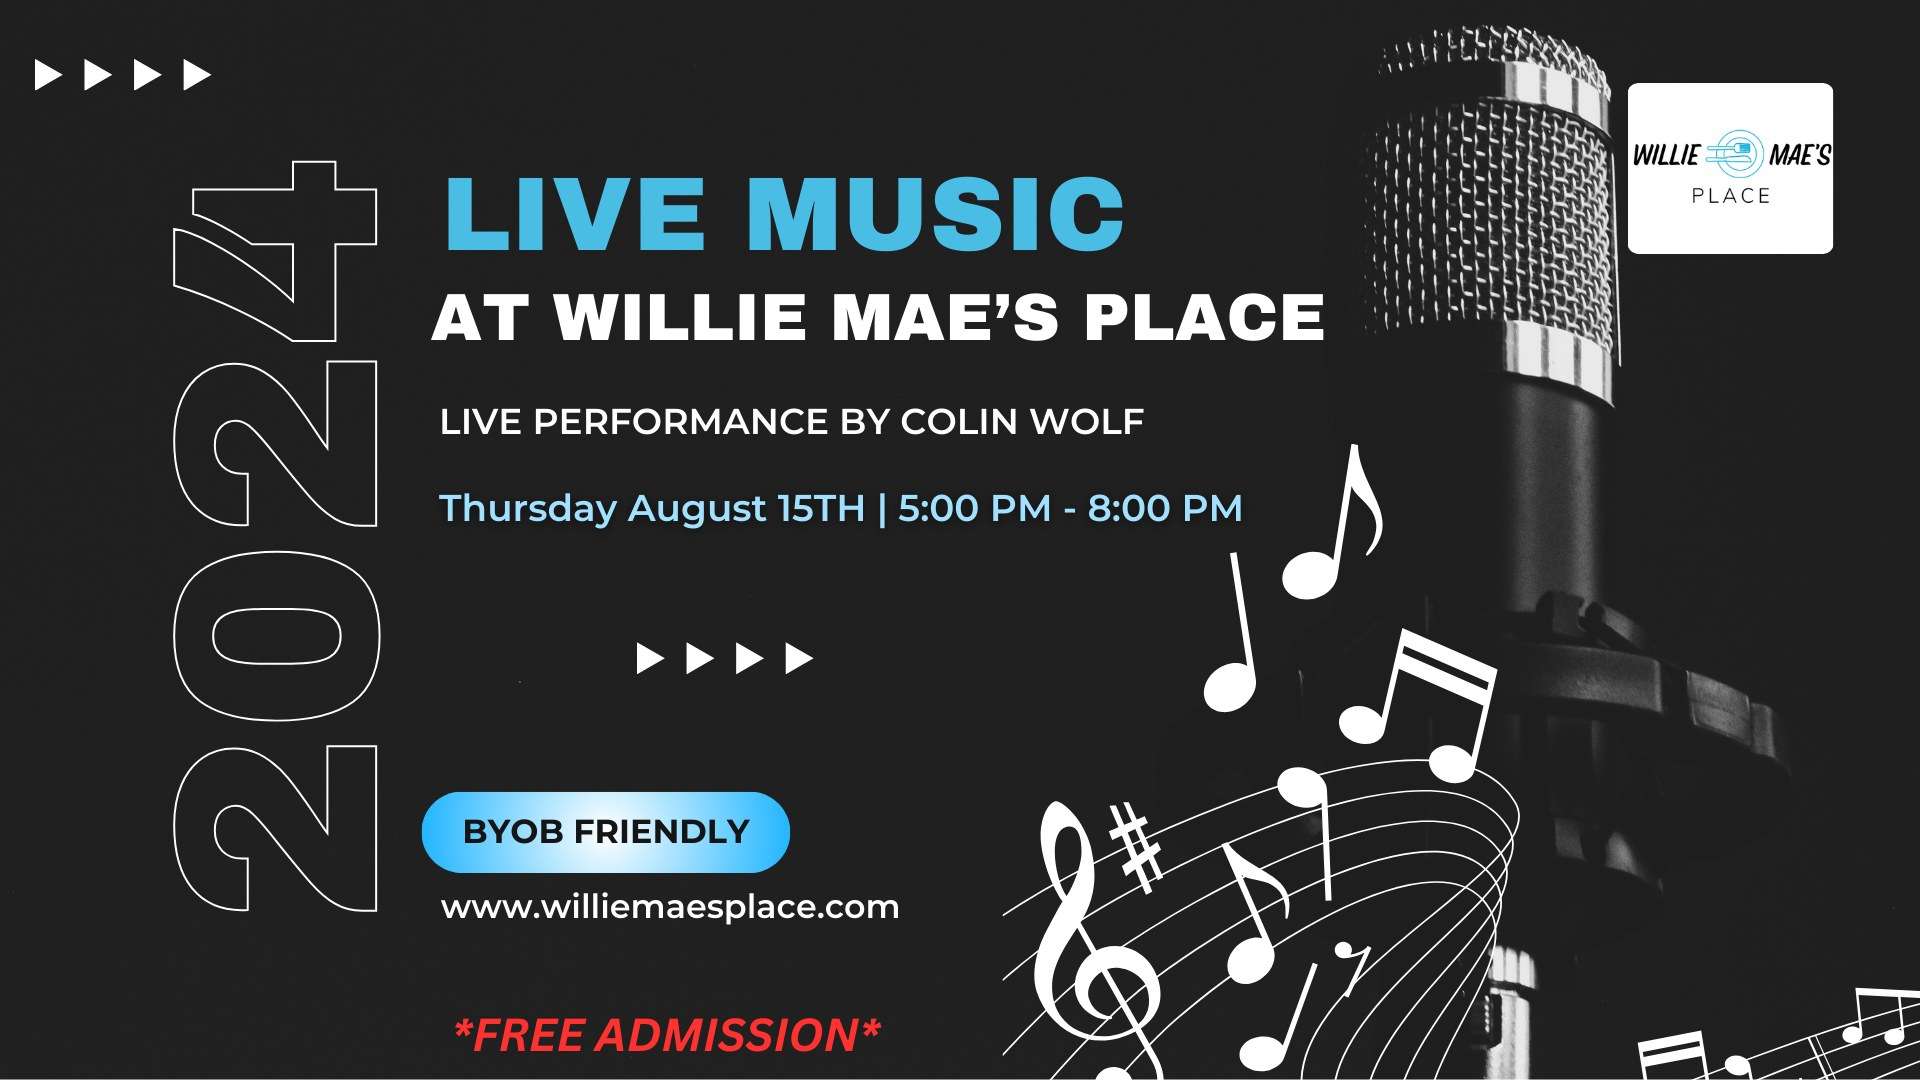 Colin Wolf Live Music performance at Willie Mae's Place